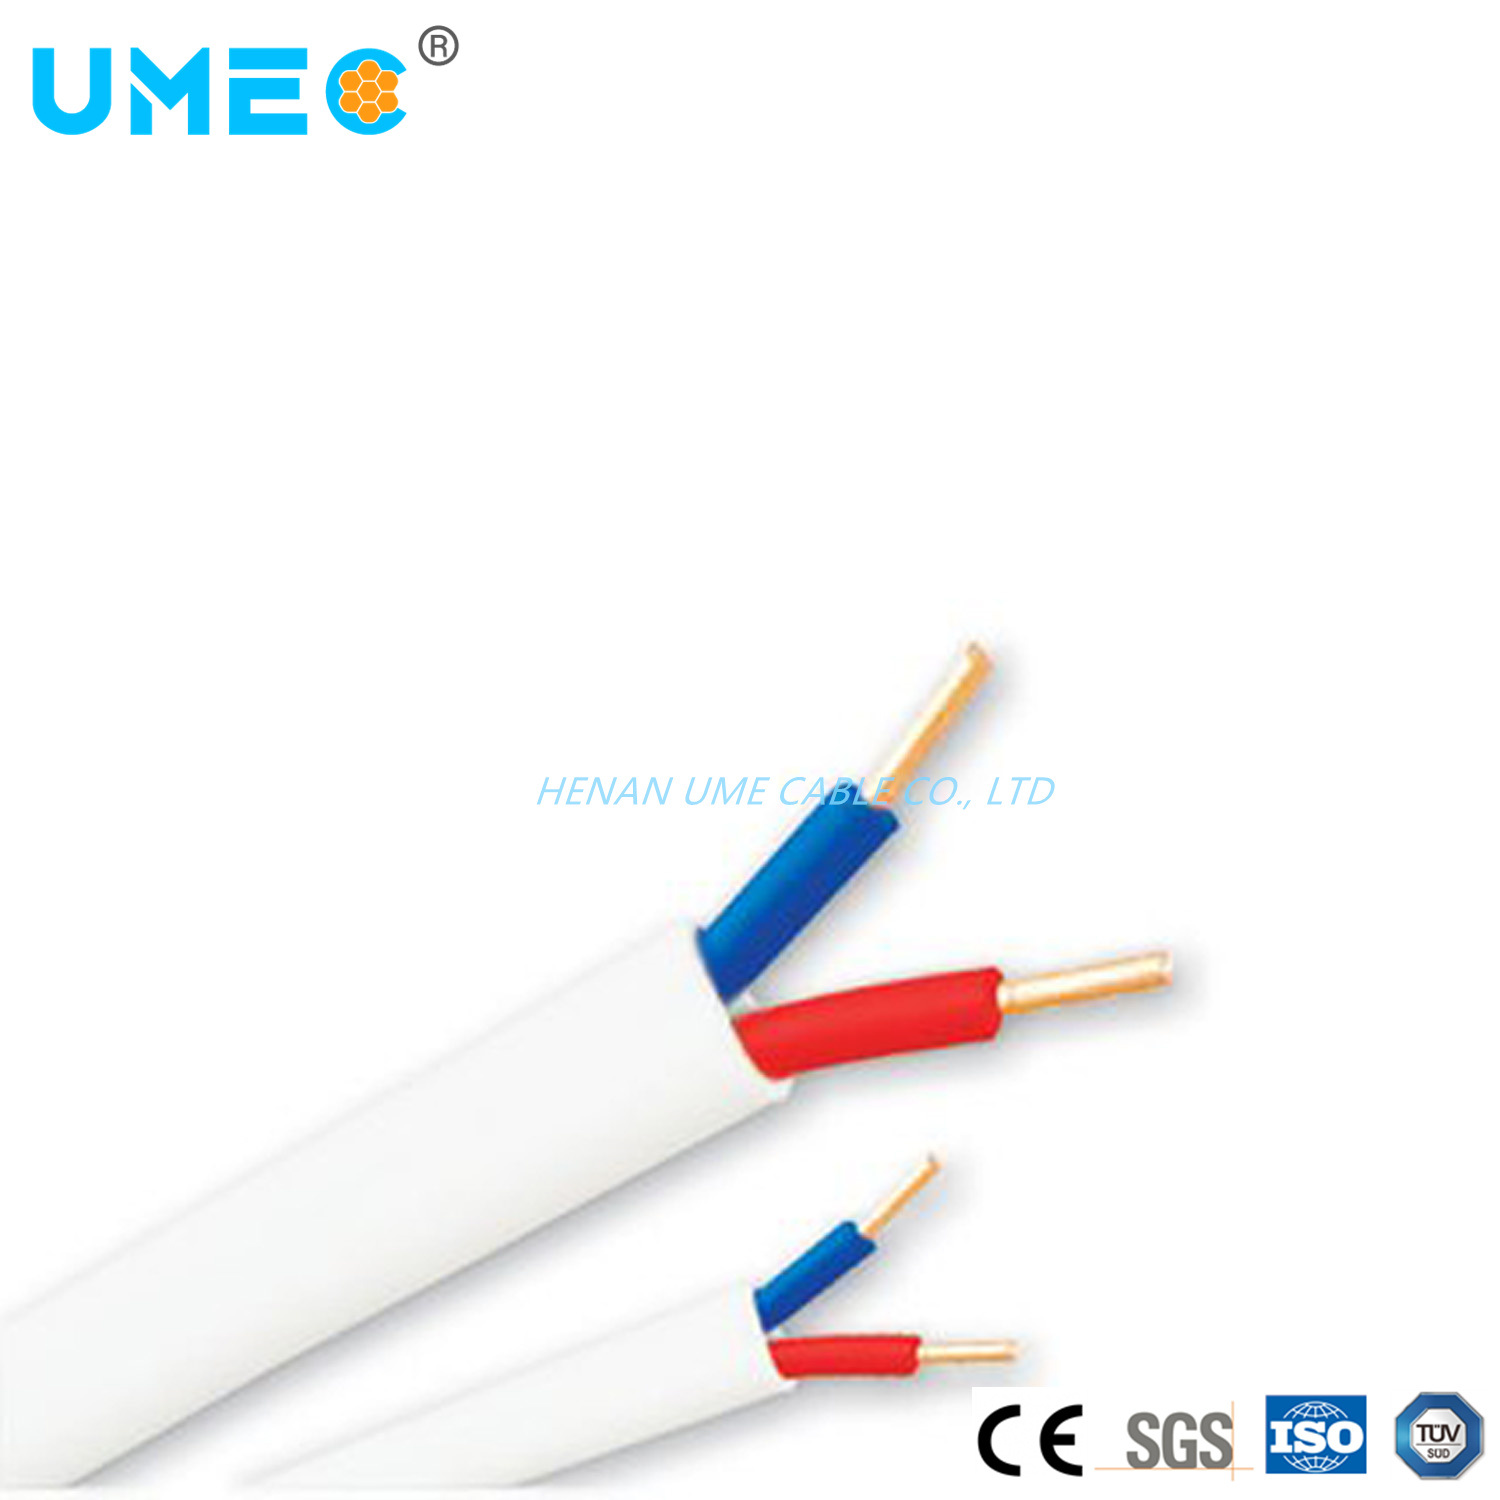 PVC Insulated and Sheathed PVC Flat TPS Power Cable 450/750V TPS